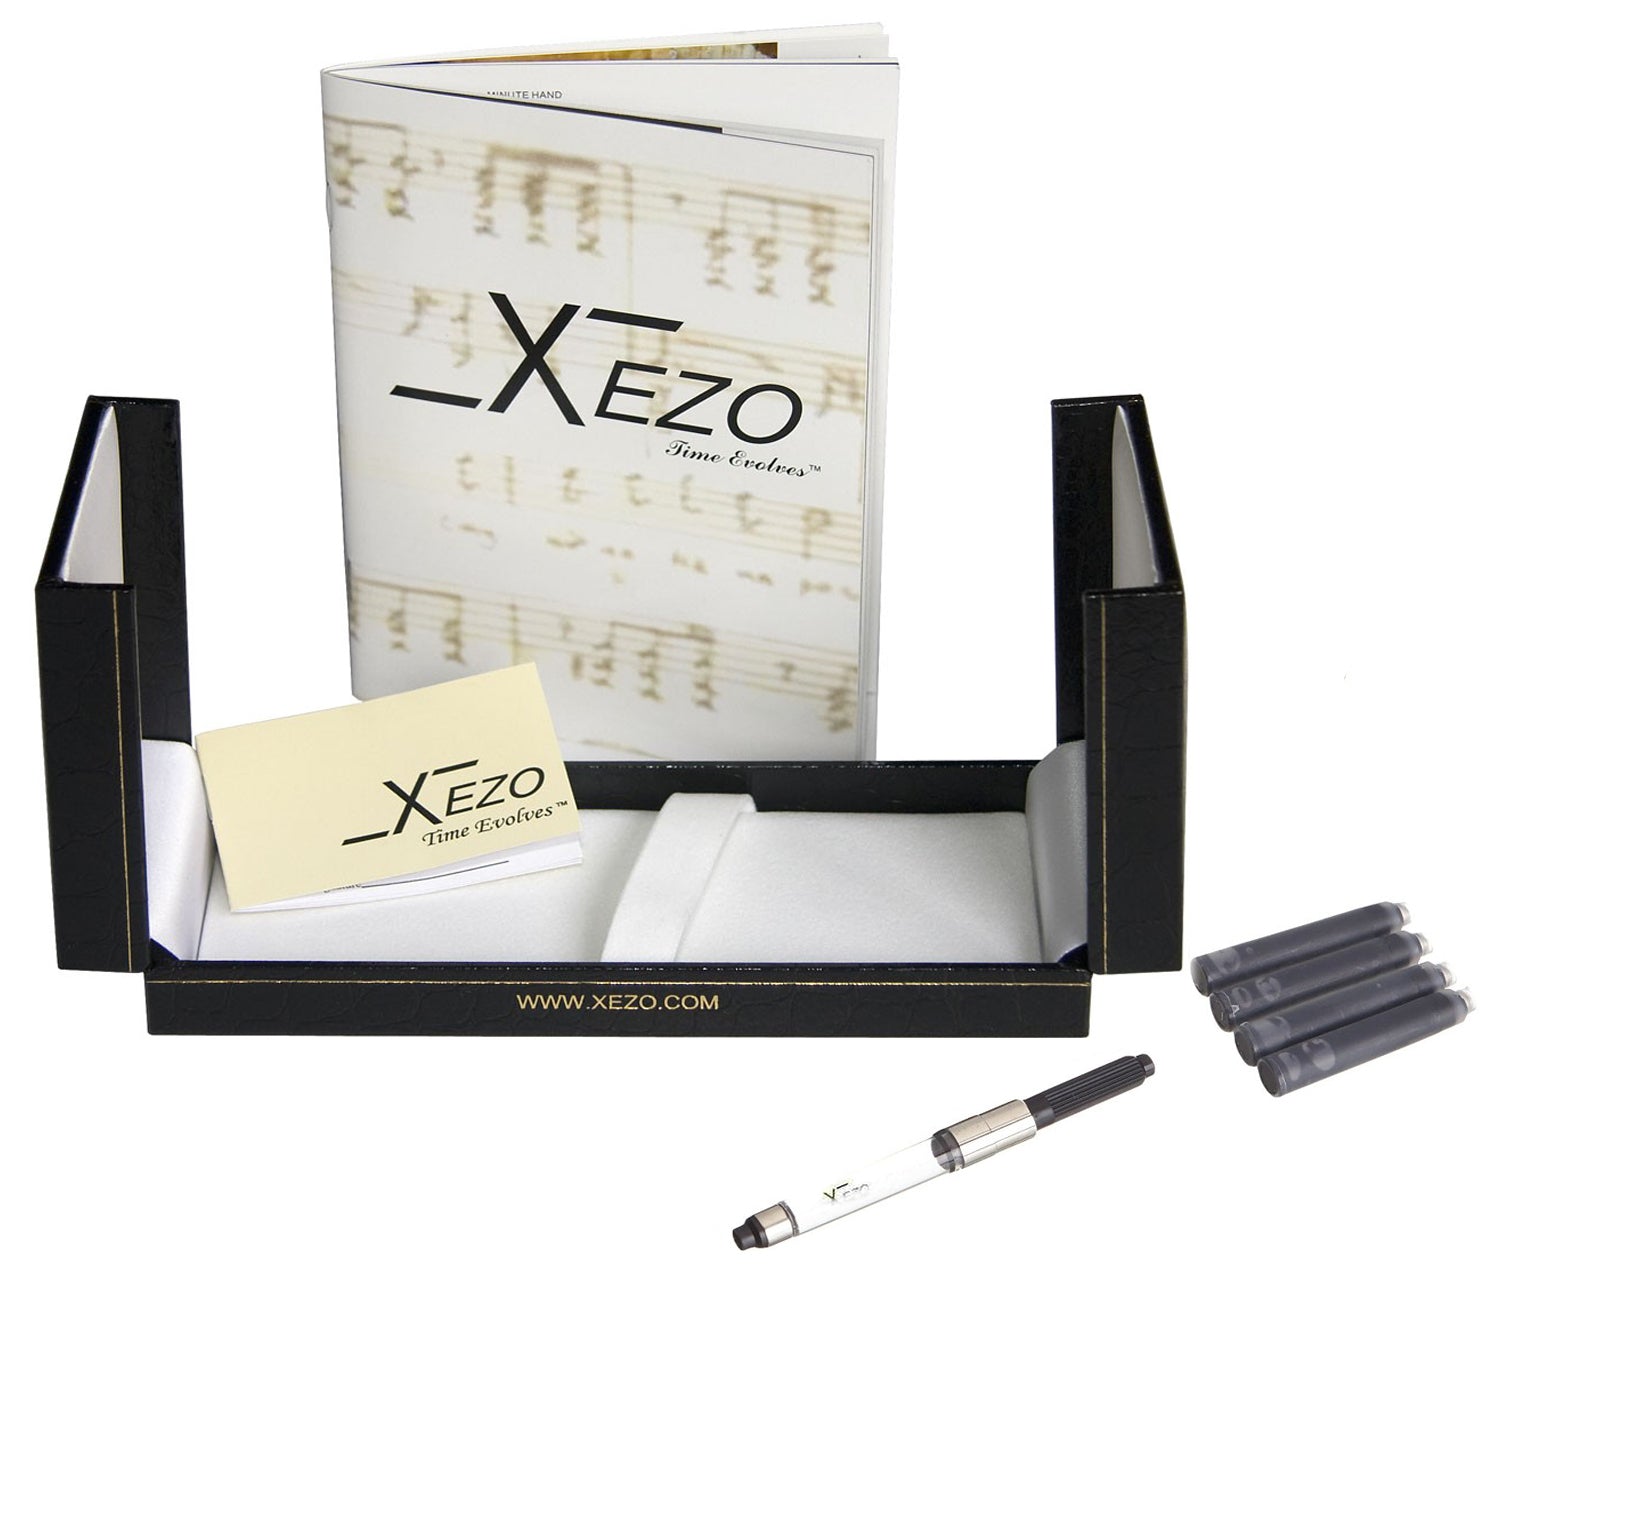 Xezo - Black gift box, certificate, manual, chrome-plated ink converter, and four ink cartridges of the Maestro Sea Shell FP-2 fountain pen